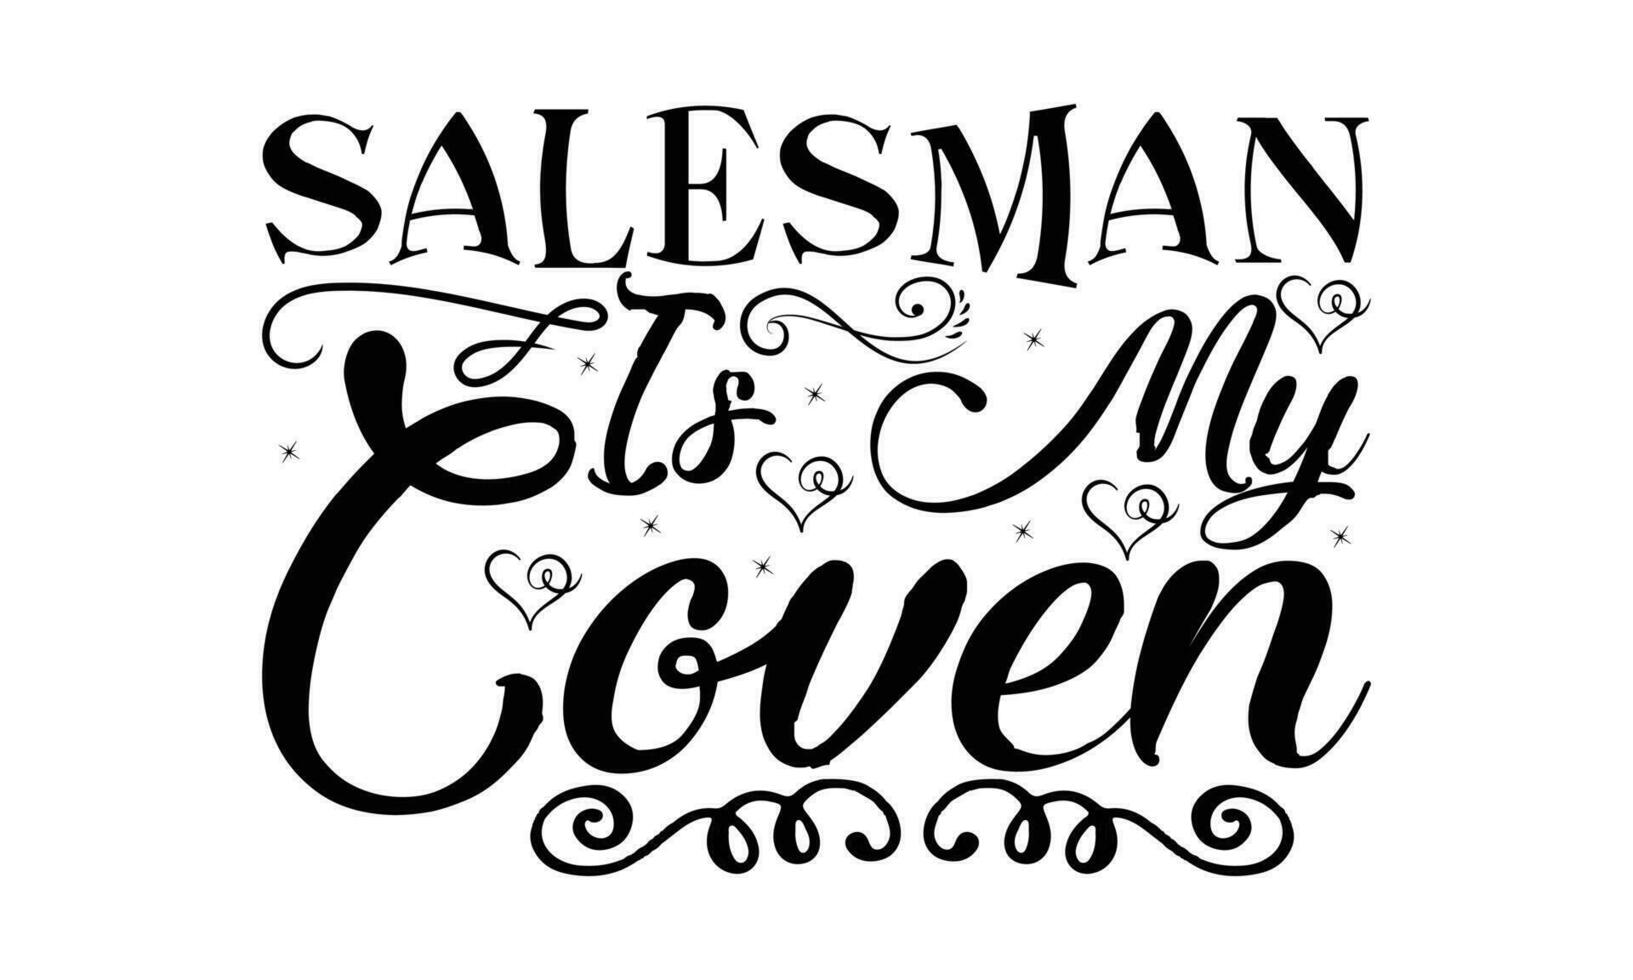 Salesman -  Lettering design for greeting banners, Mouse Pads, Prints, Cards and Posters, Mugs, Notebooks, Floor Pillows and T-shirt prints design. vector